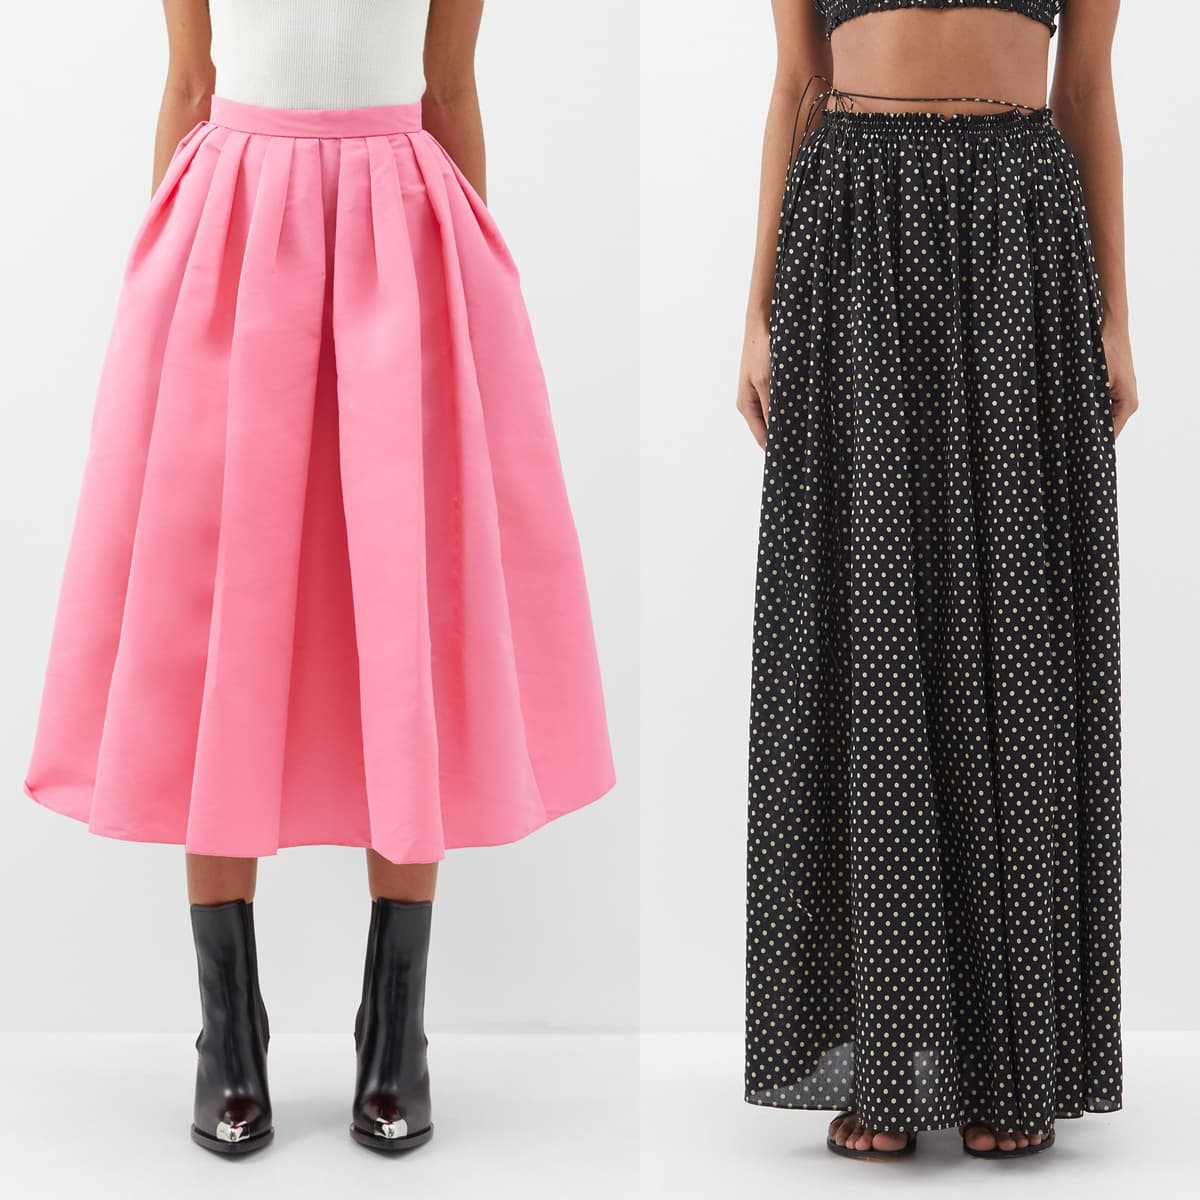 Midi skirts gracefully drape between the knees and ankles, whereas maxi skirts elegantly cascade all the way down to the ankles